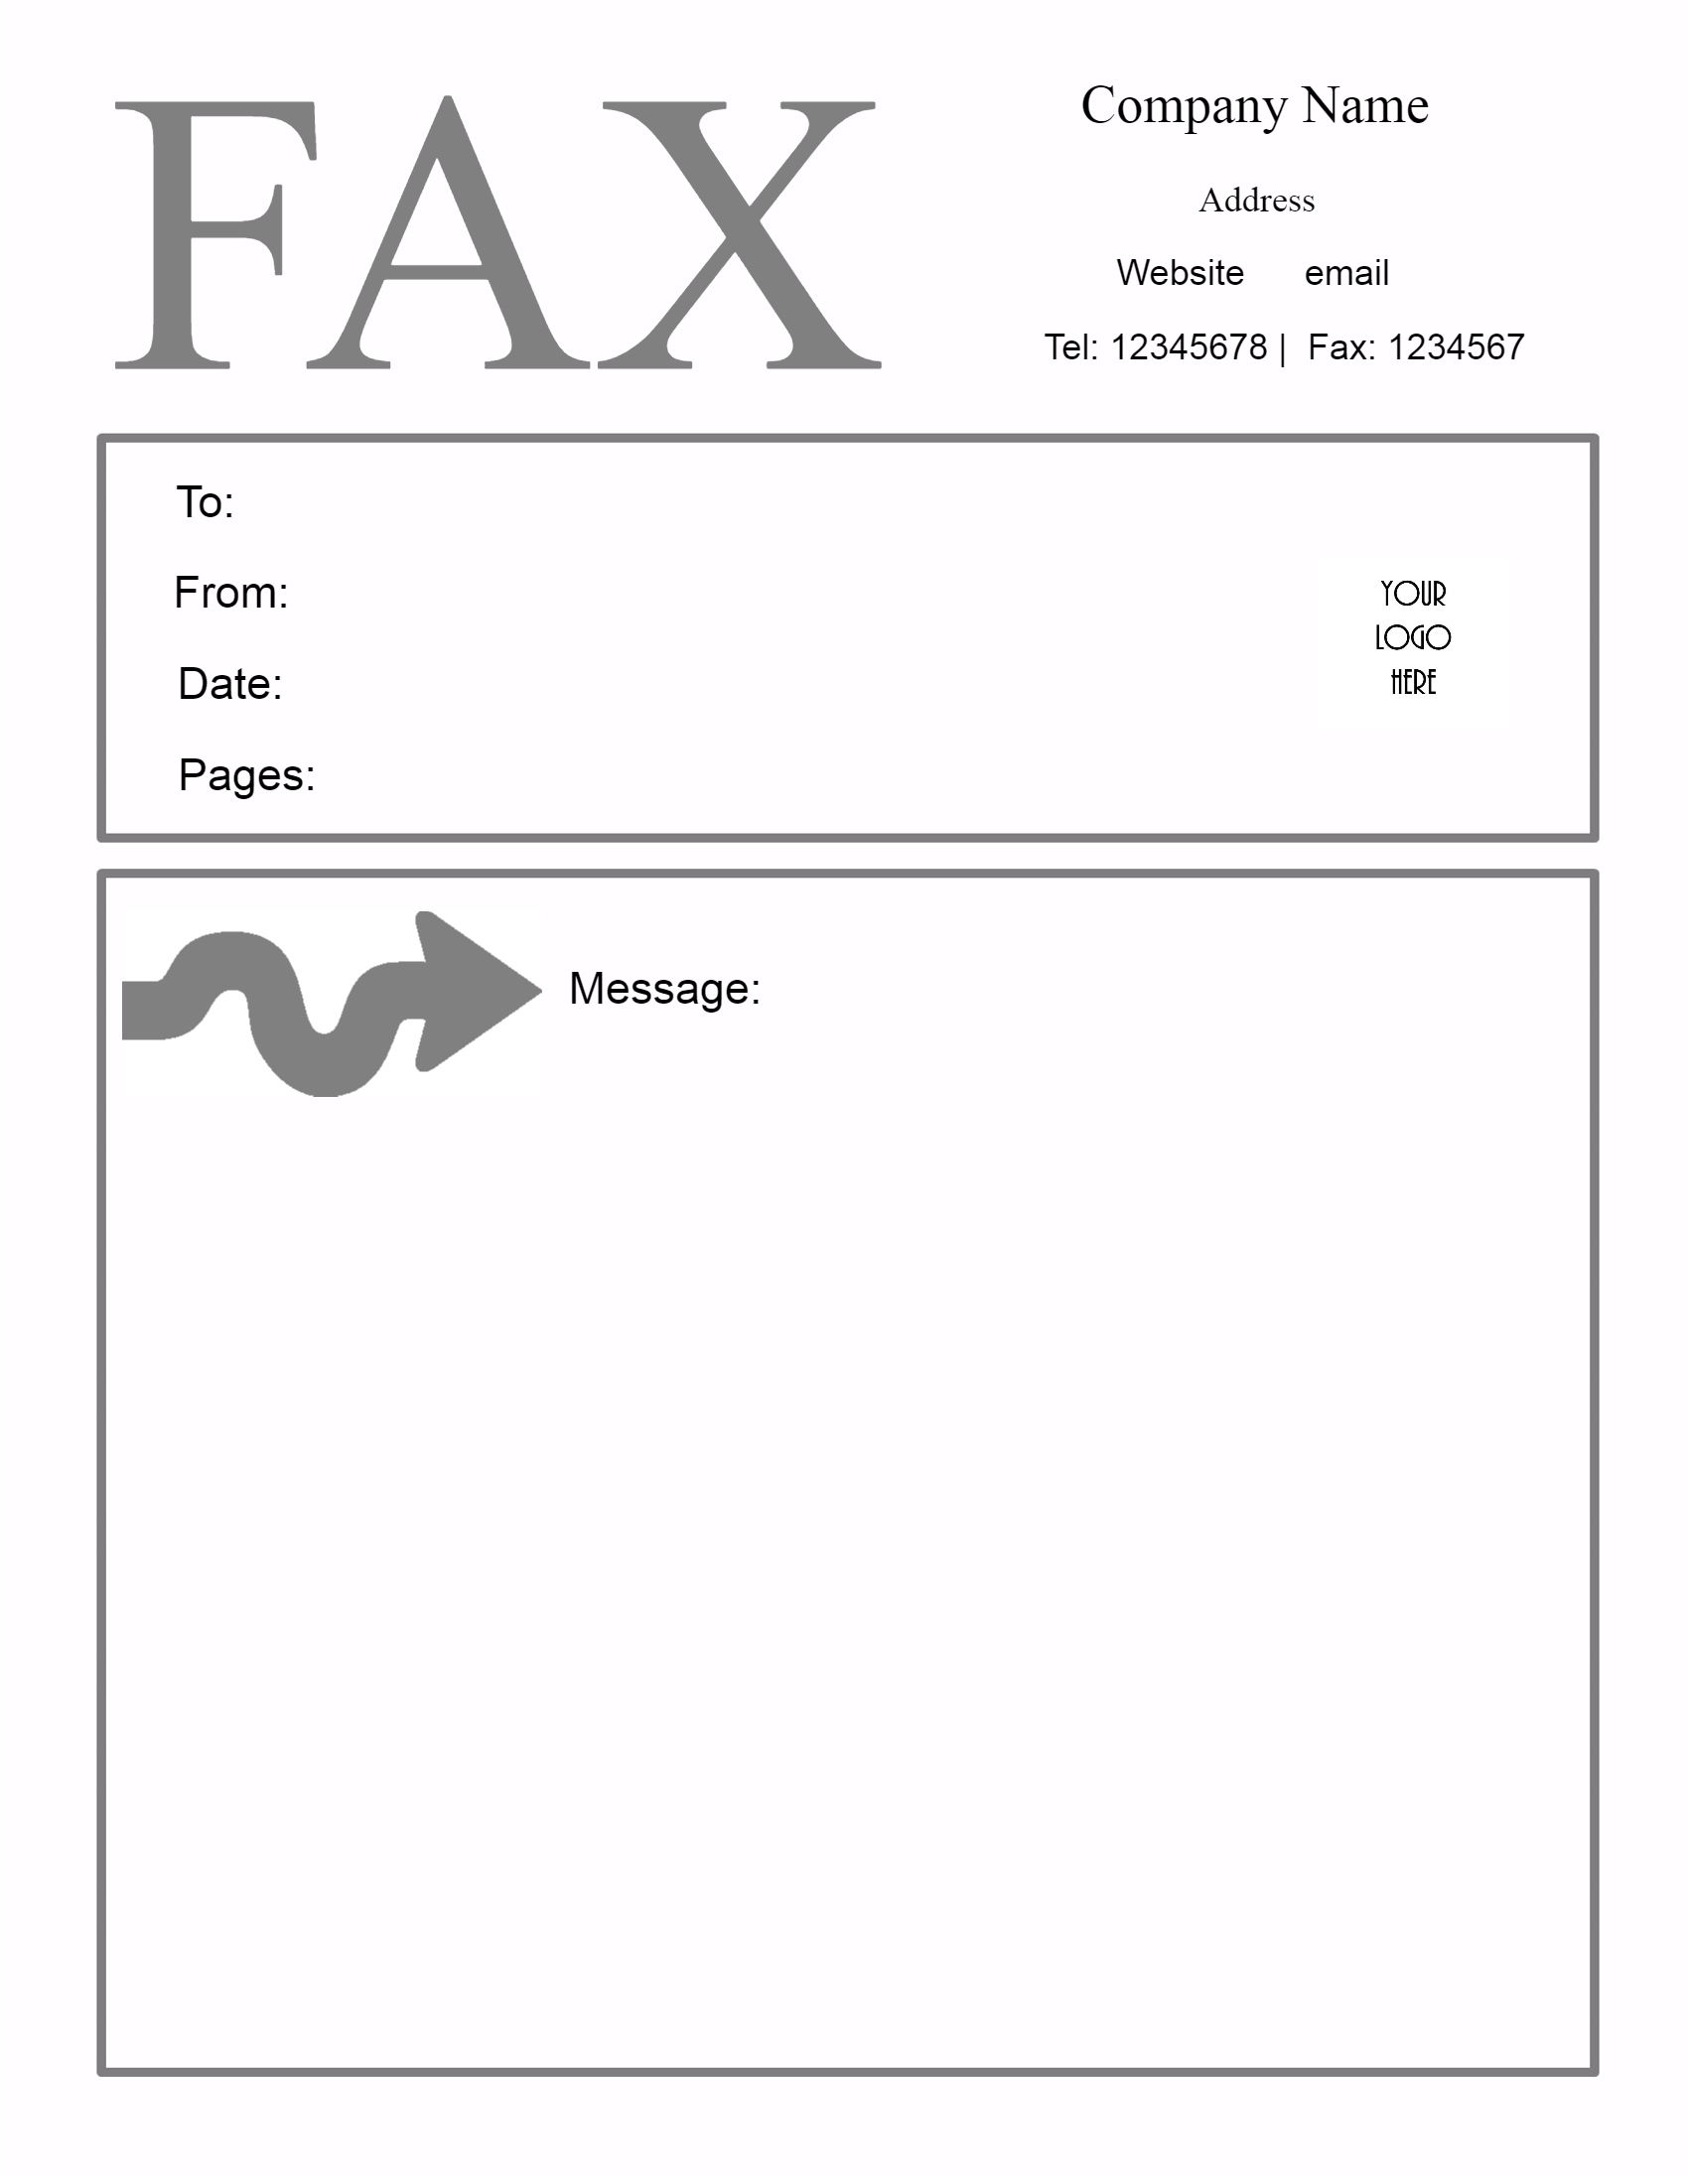 sample cover sheet for fax attention to